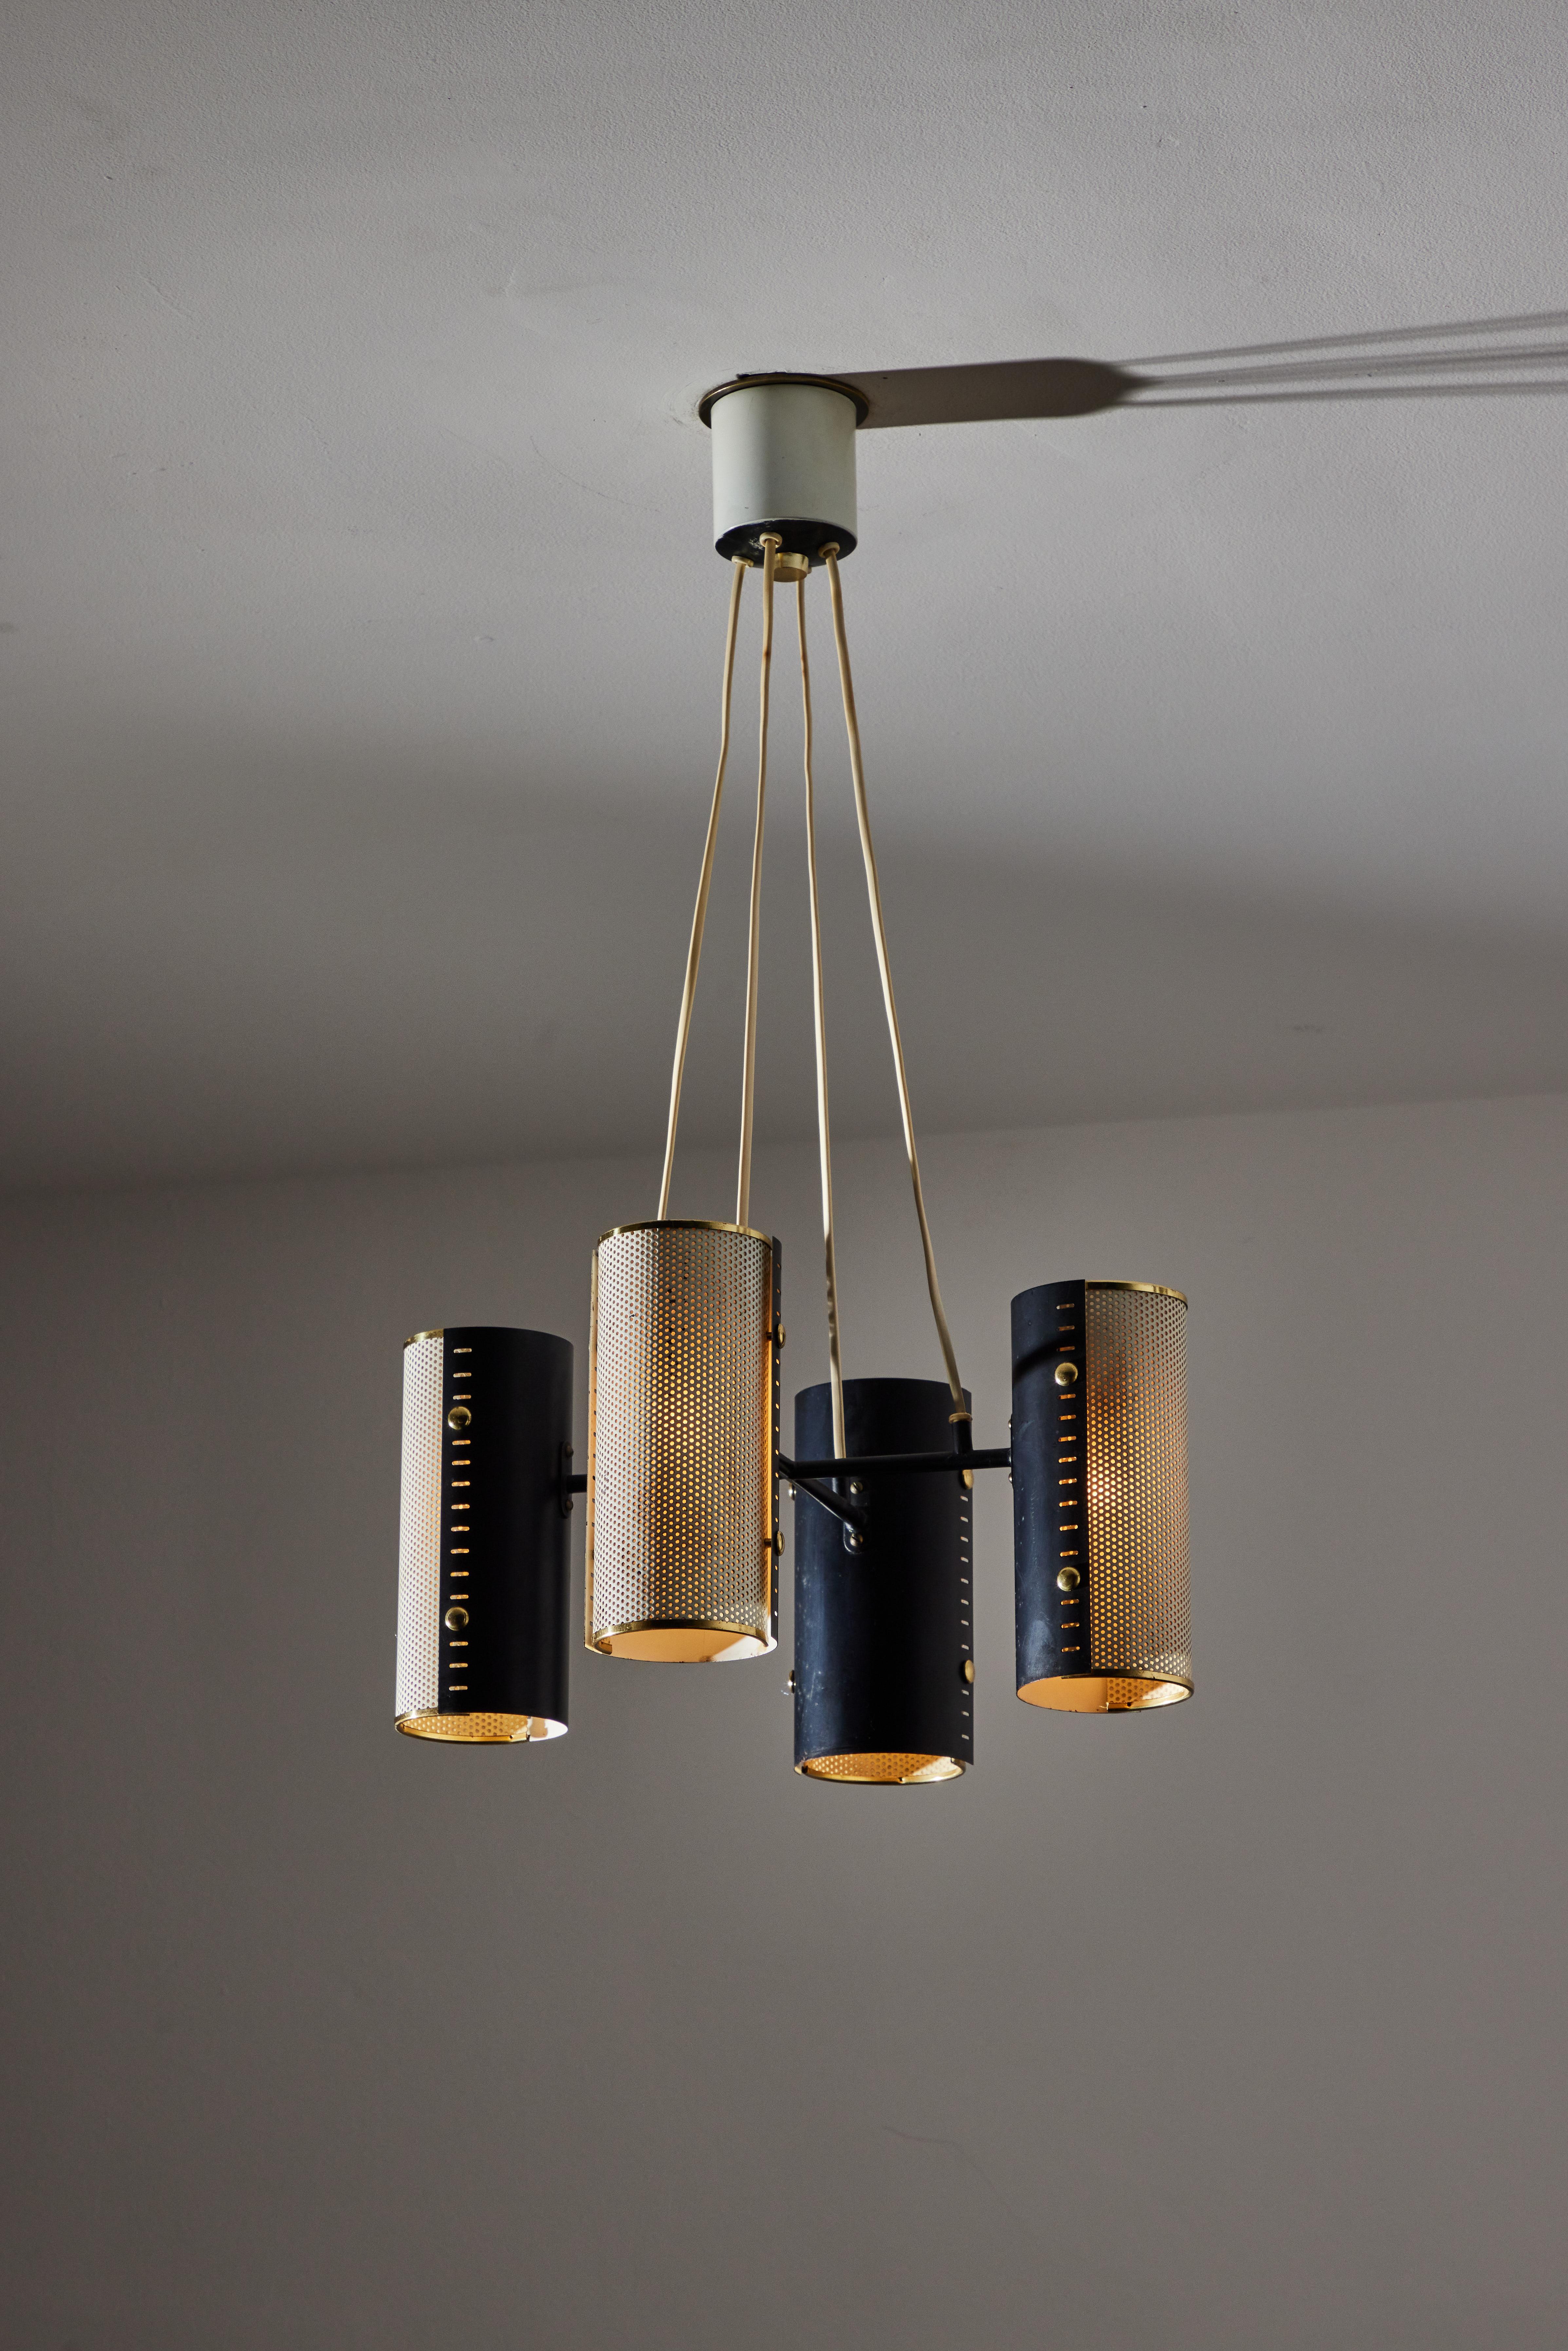 Suspension light by Borens. Manufactured in Sweden circa 1950's. Enameled metal, original canopy. Wired for U.S. standards. We recommend four E27 40w maximum bulbs. Bulbs not included.
Please note that this fixture has wear and is very distressed. 